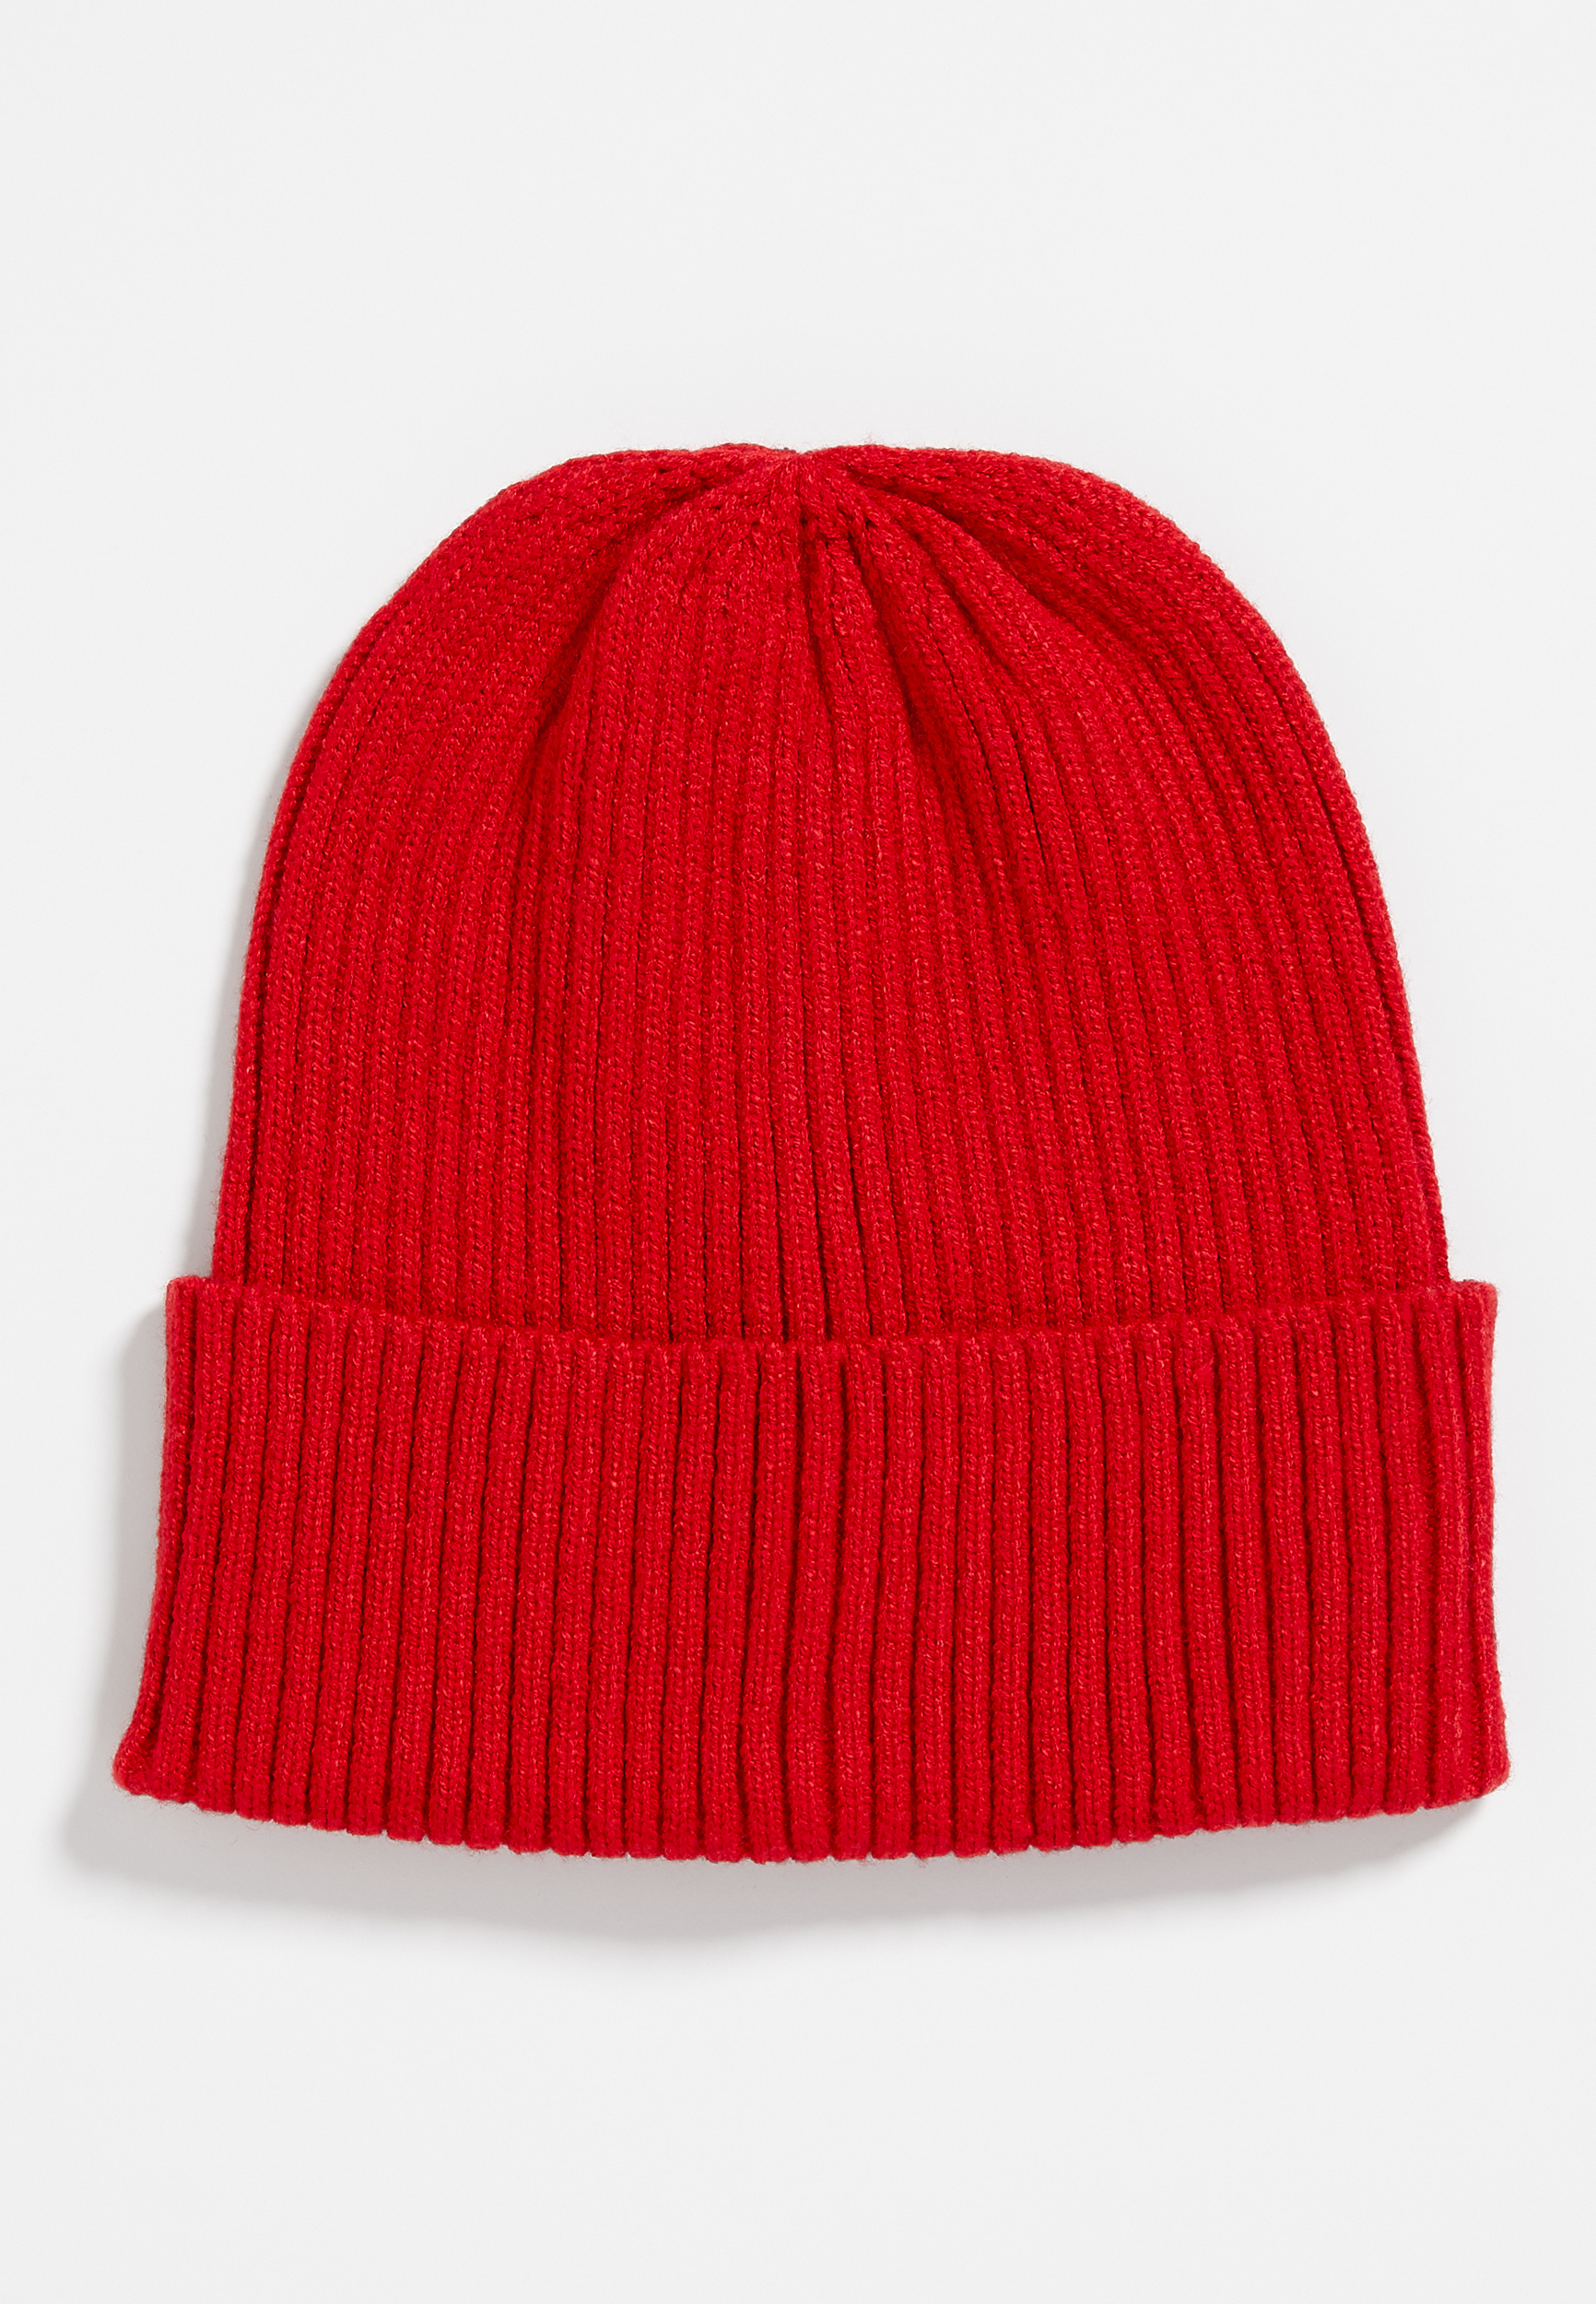 Hats & Gloves For Women | Winter Hats, Beanies, Pom Hats & More | maurices